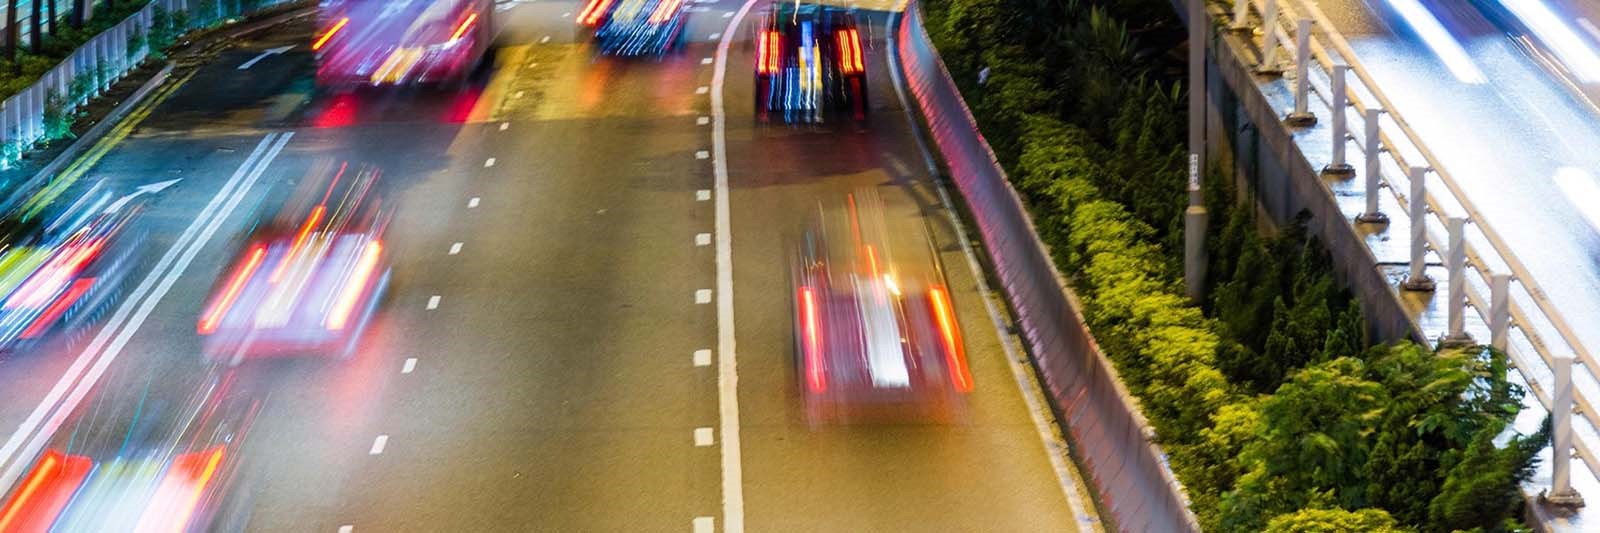 Blurry picture of traffic on a busy road